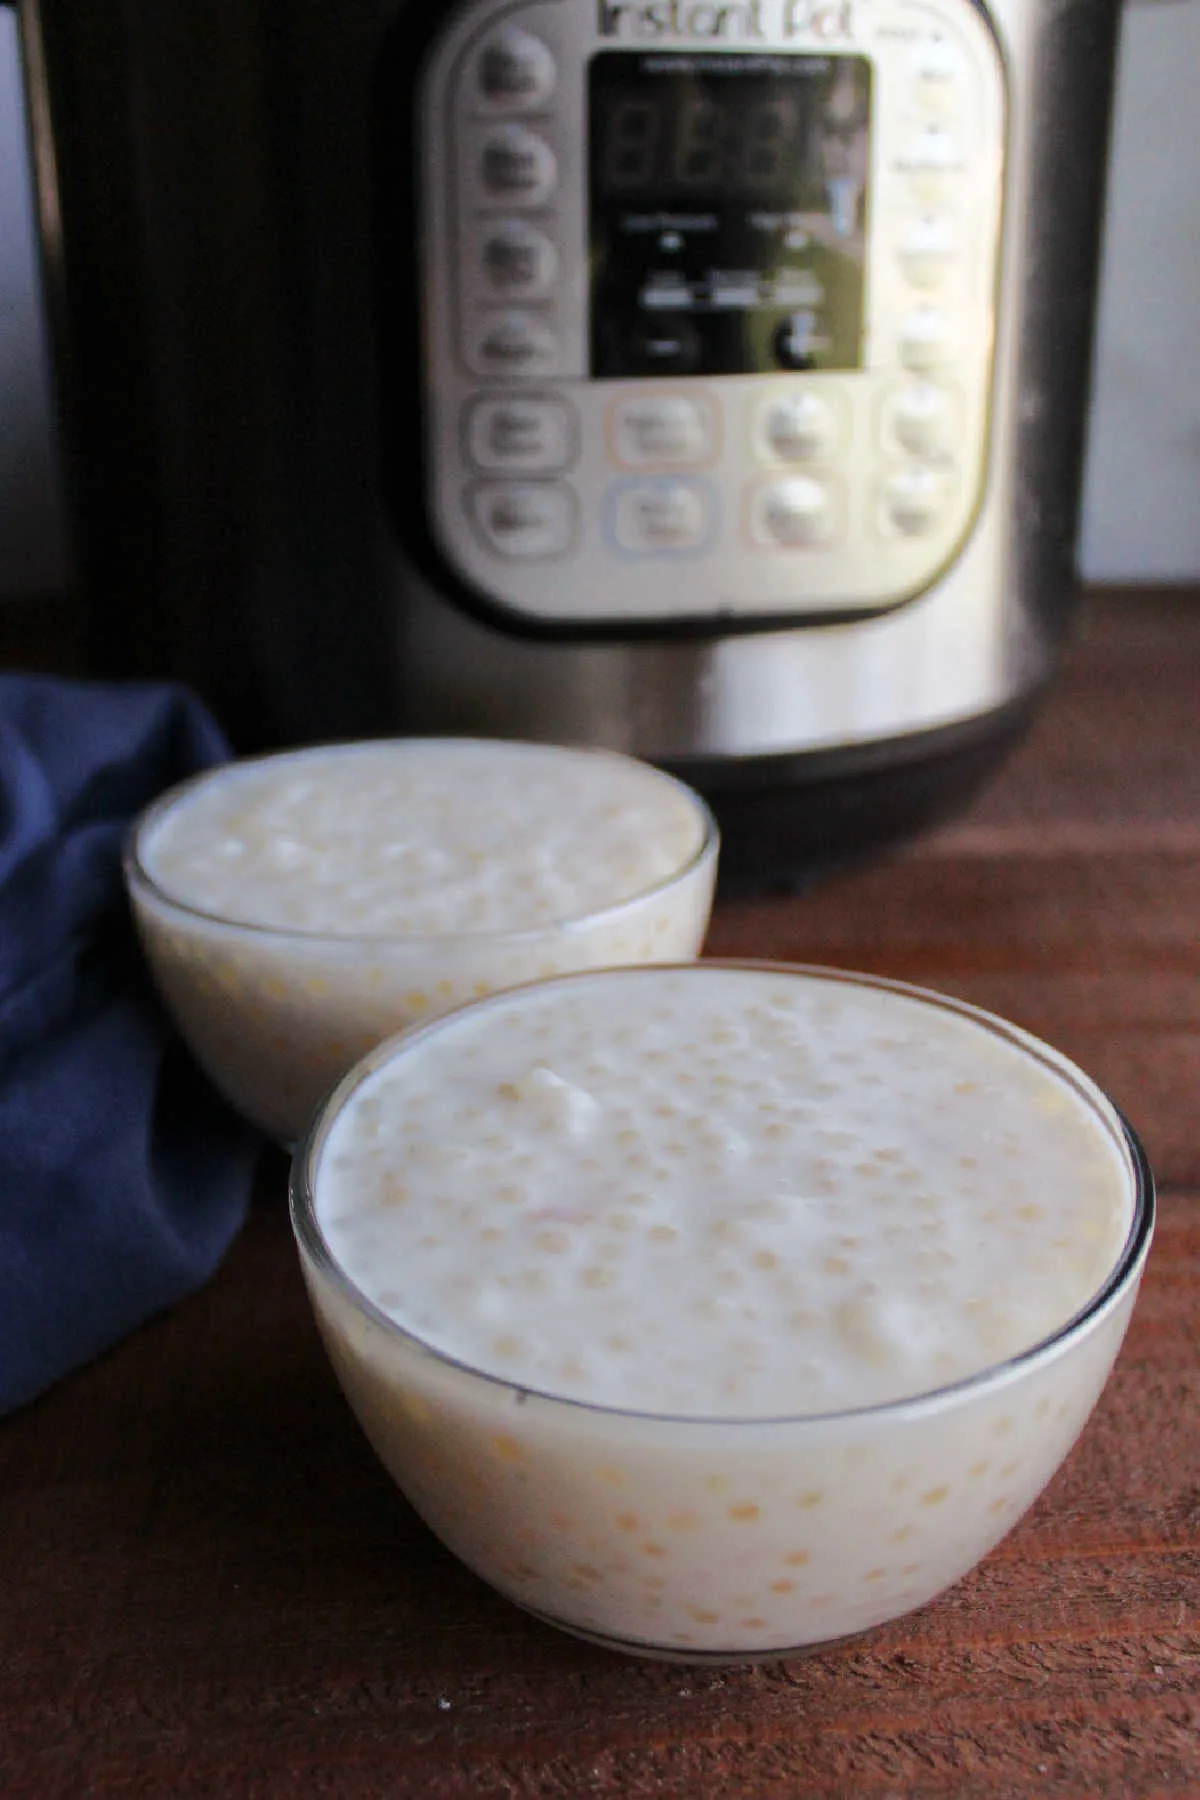 Small bowls of homemade vanilla tapioca pudding in front of the instant pot it was made in.